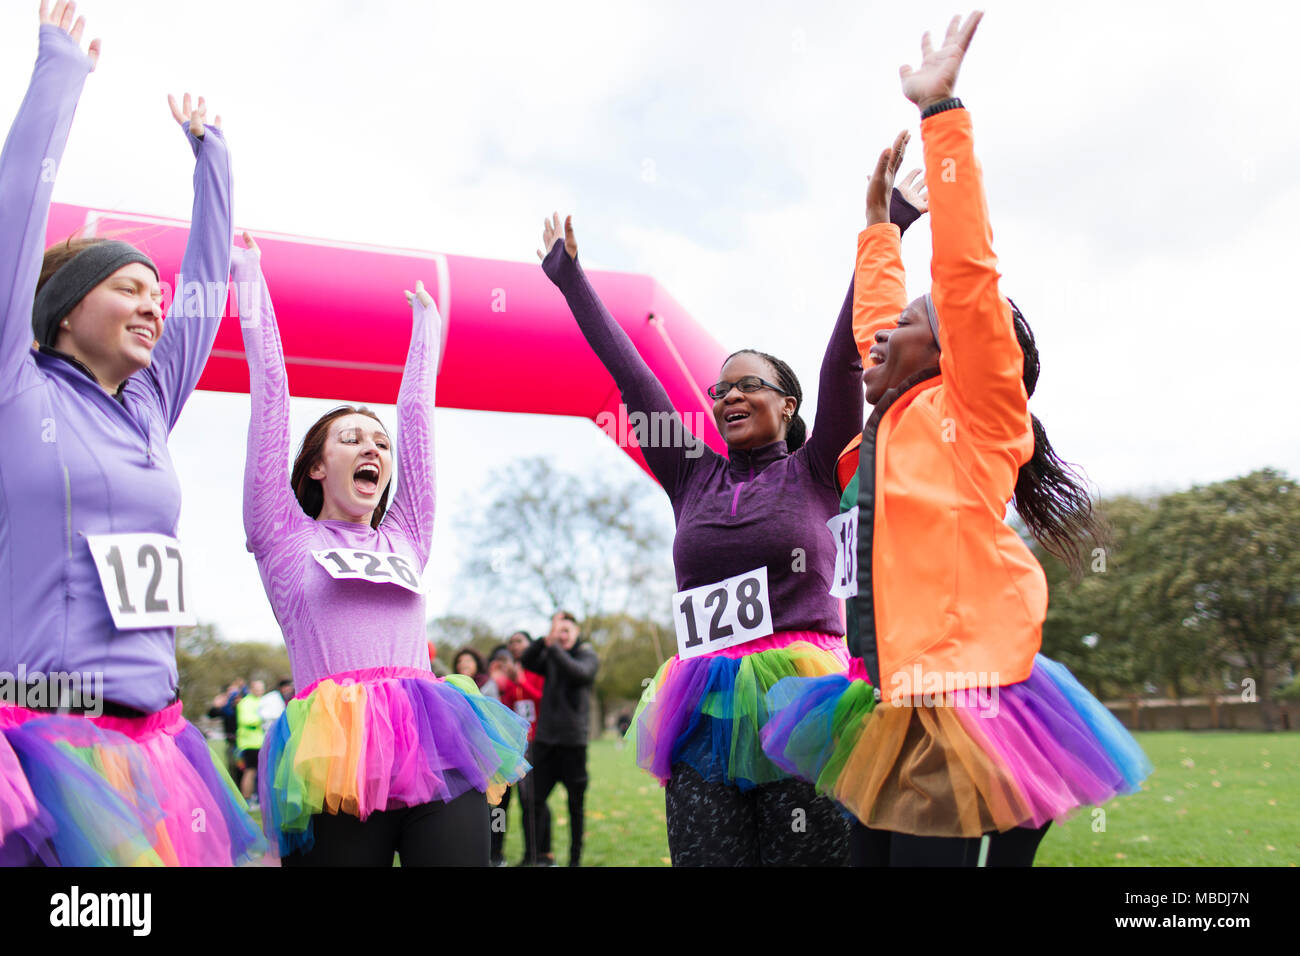 Enthusiastic female runners in tutus cheering, celebrating at charity run finish line Stock Photo